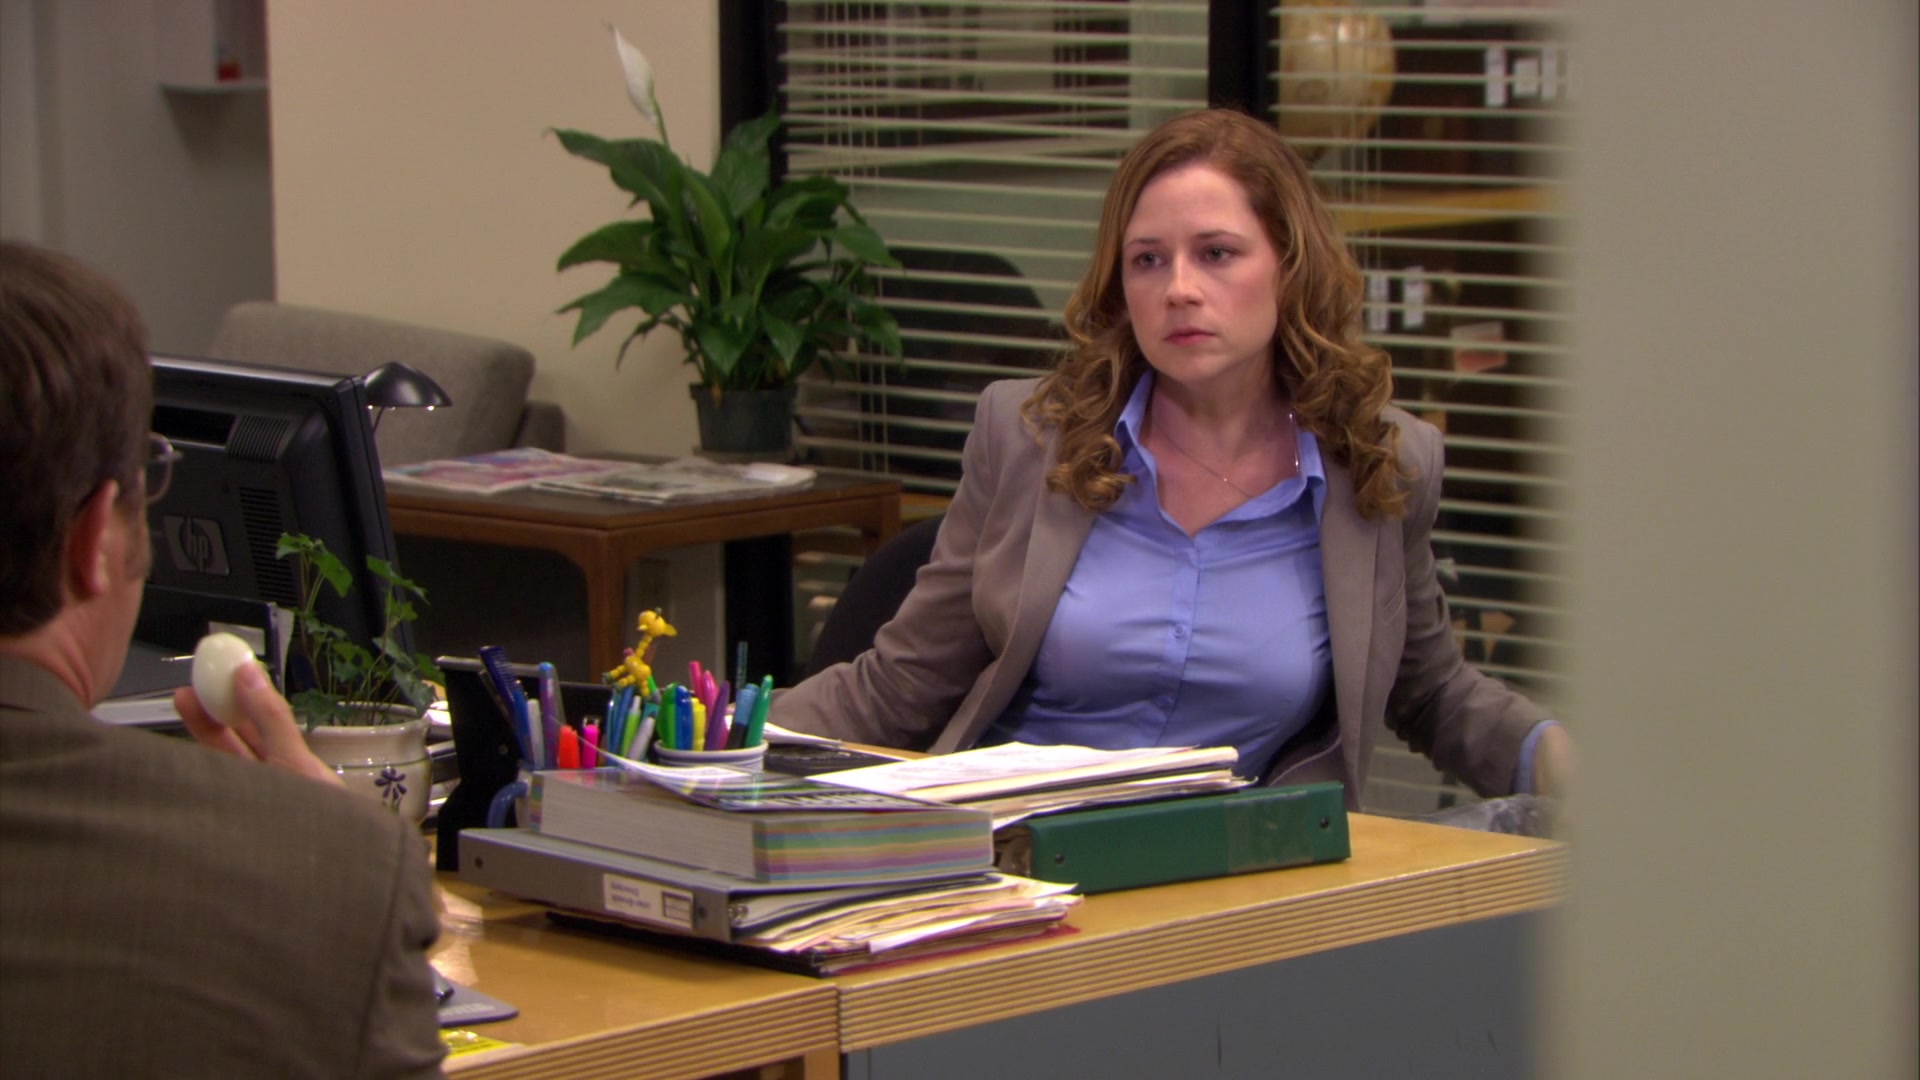 Pam beesly hot ♥ Hot Girl - Pam Beesly foto (706040) - Fanpo